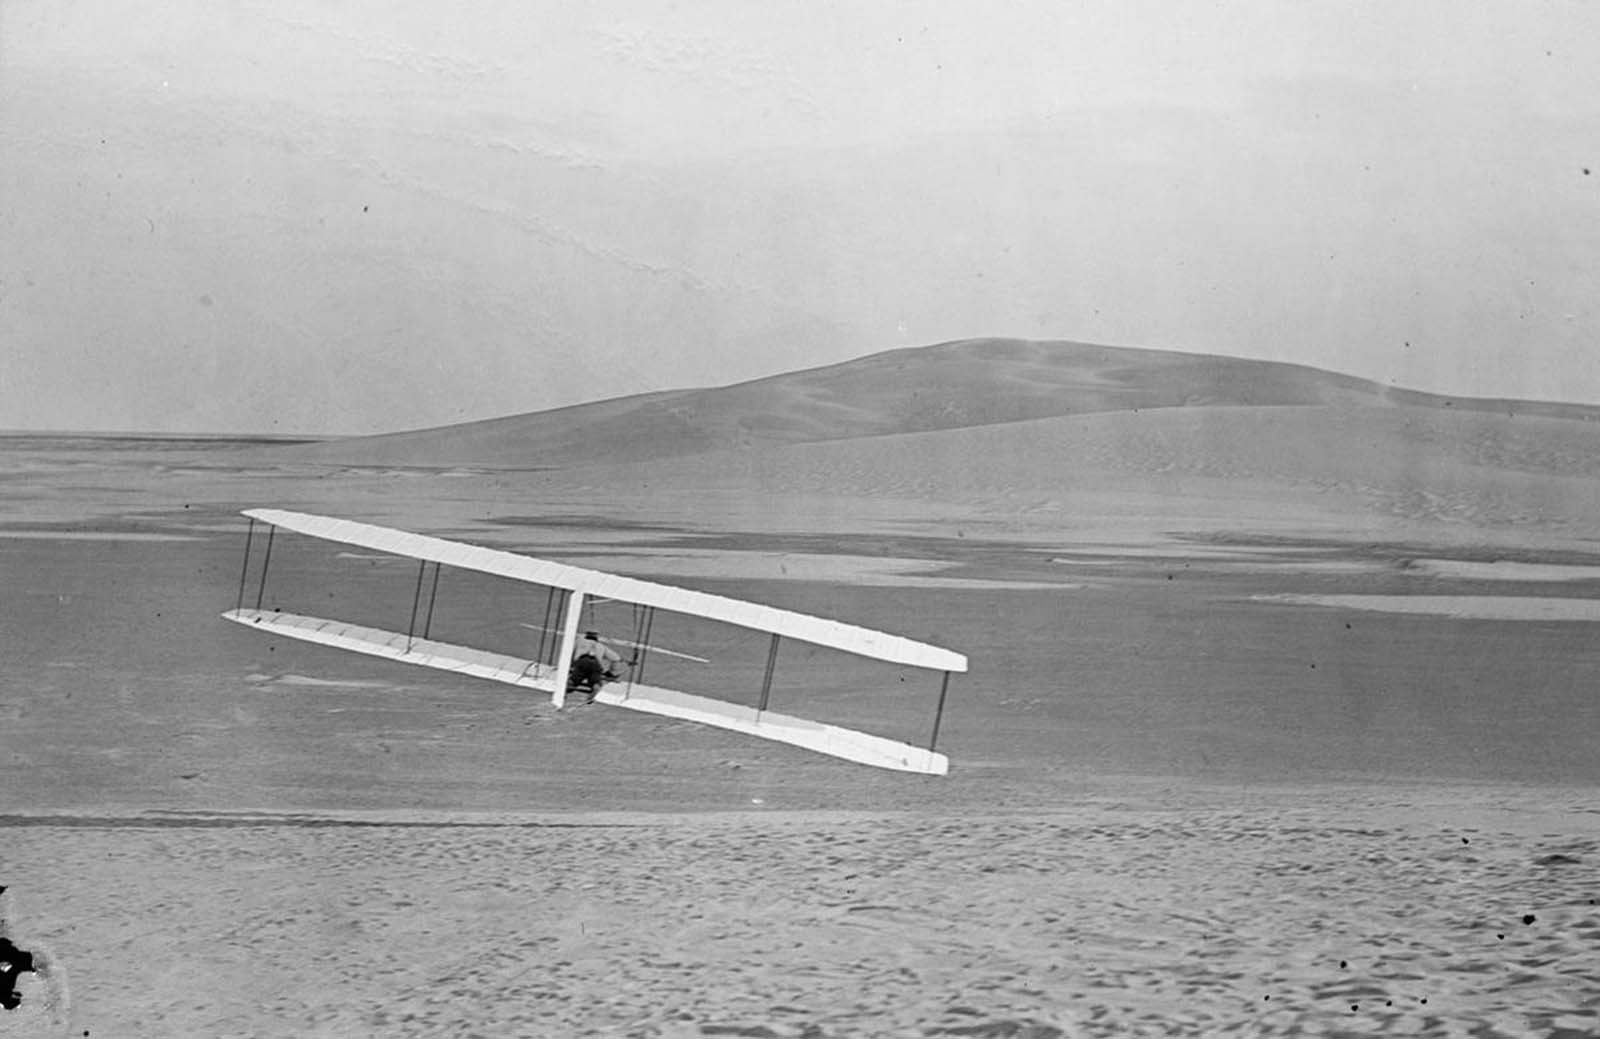 Rear view of Wilbur making a right turn in glide from No. 2 Hill, right wing tipped close to the ground, October 24, 1902.